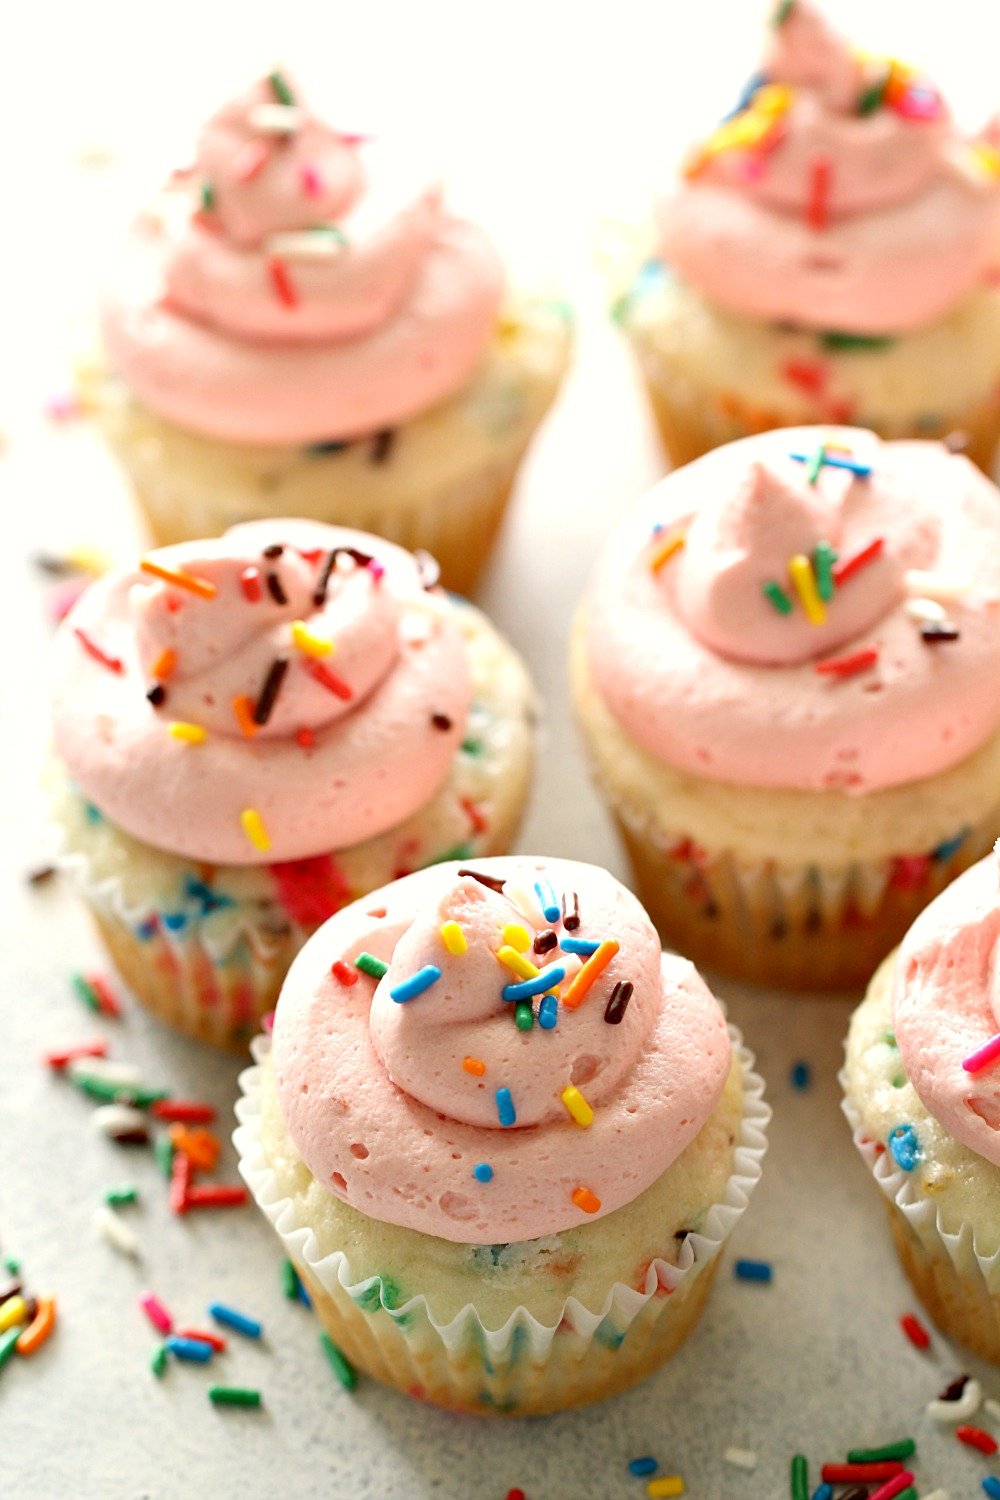 Confetti Cupcakes with Homemade Strawberry Buttercream Frosting